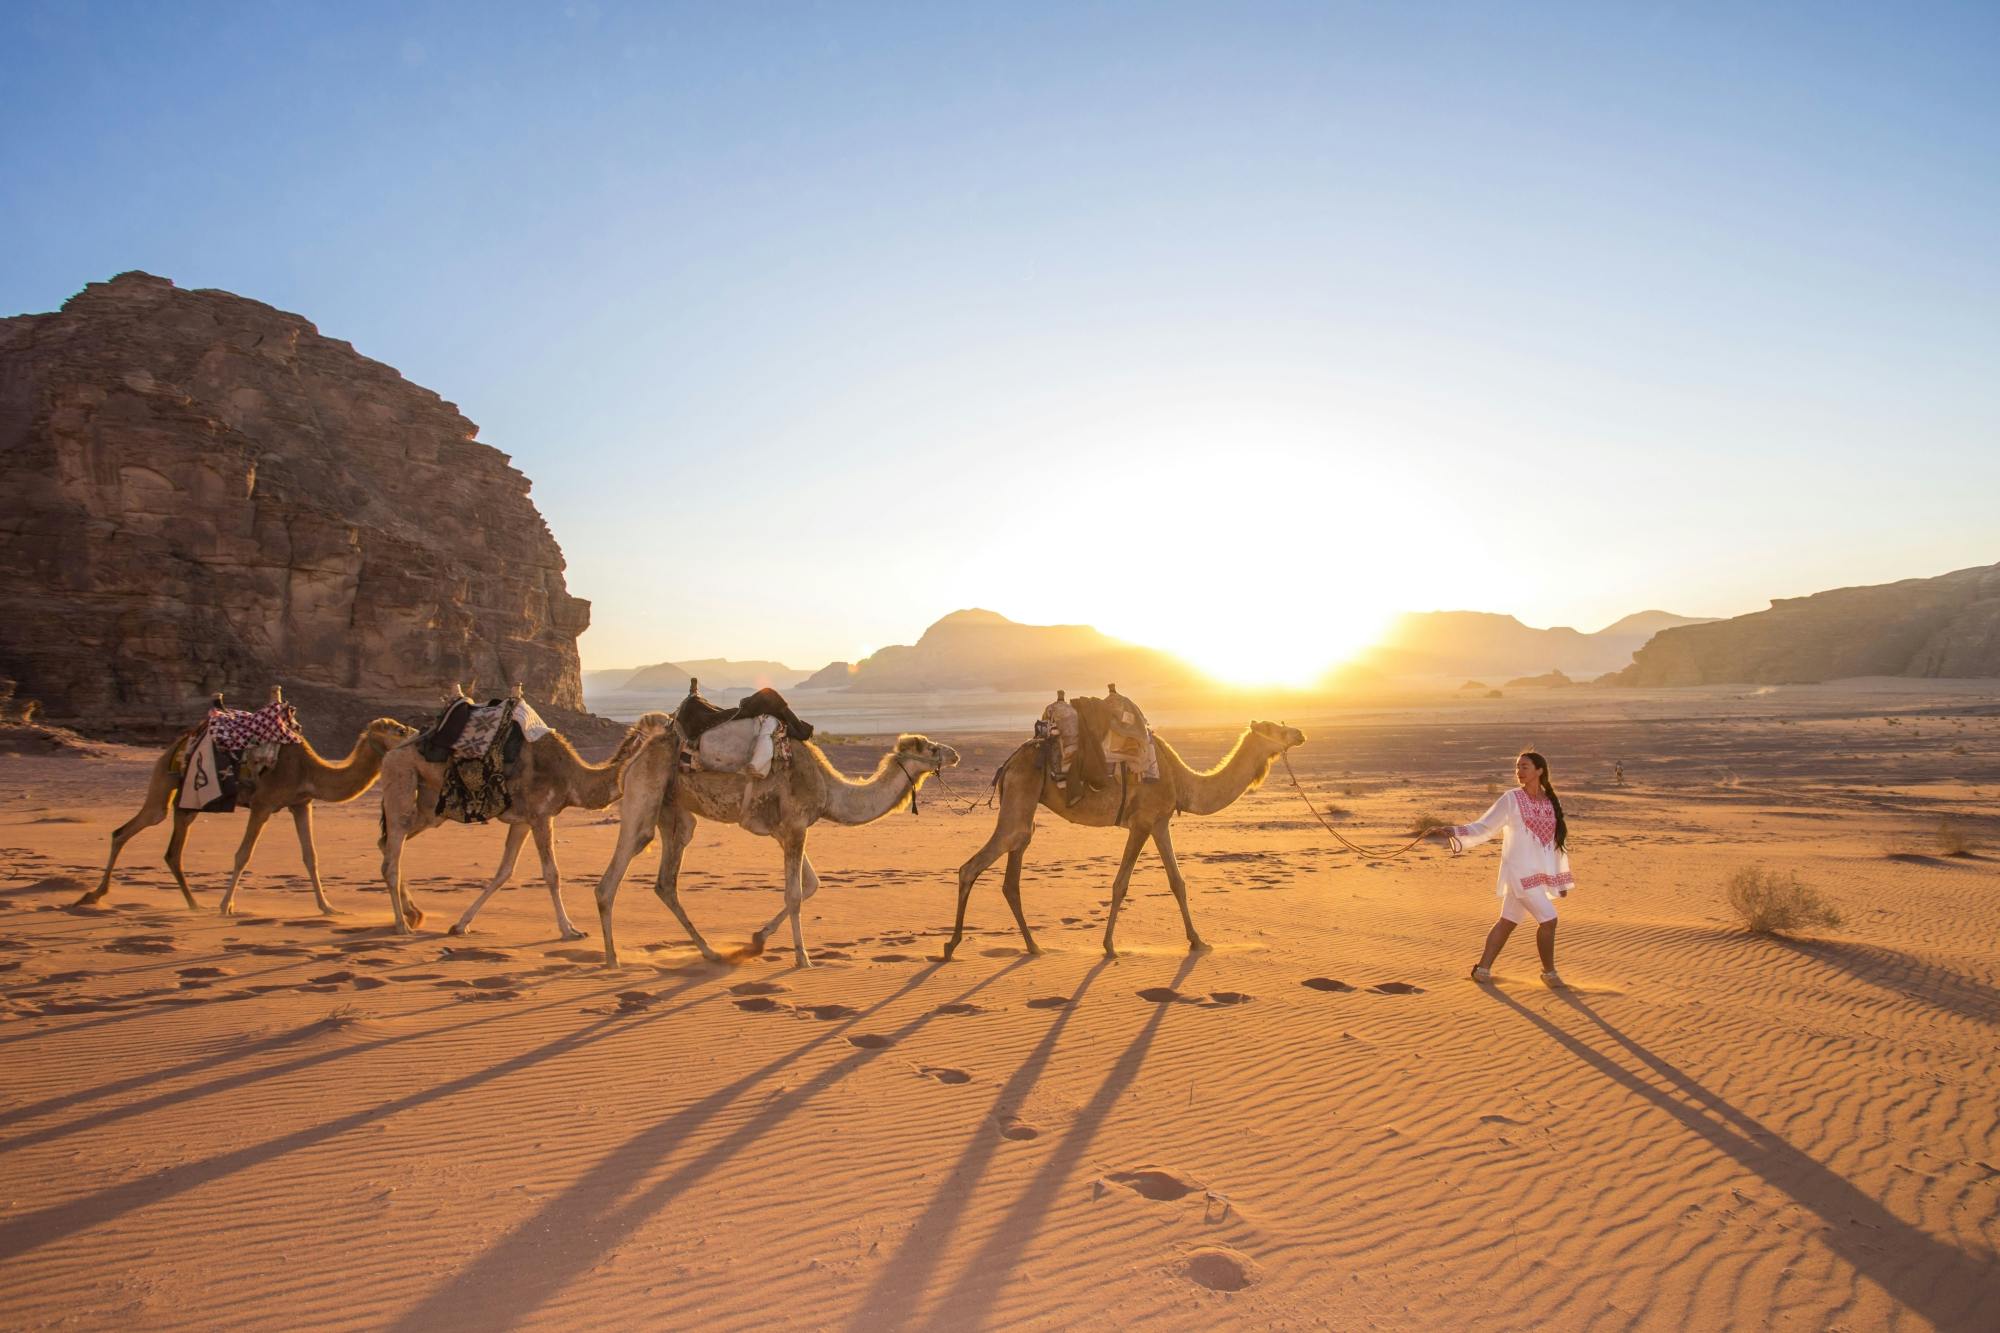 Full day Private tour to Wadi Rum from Amman Musement